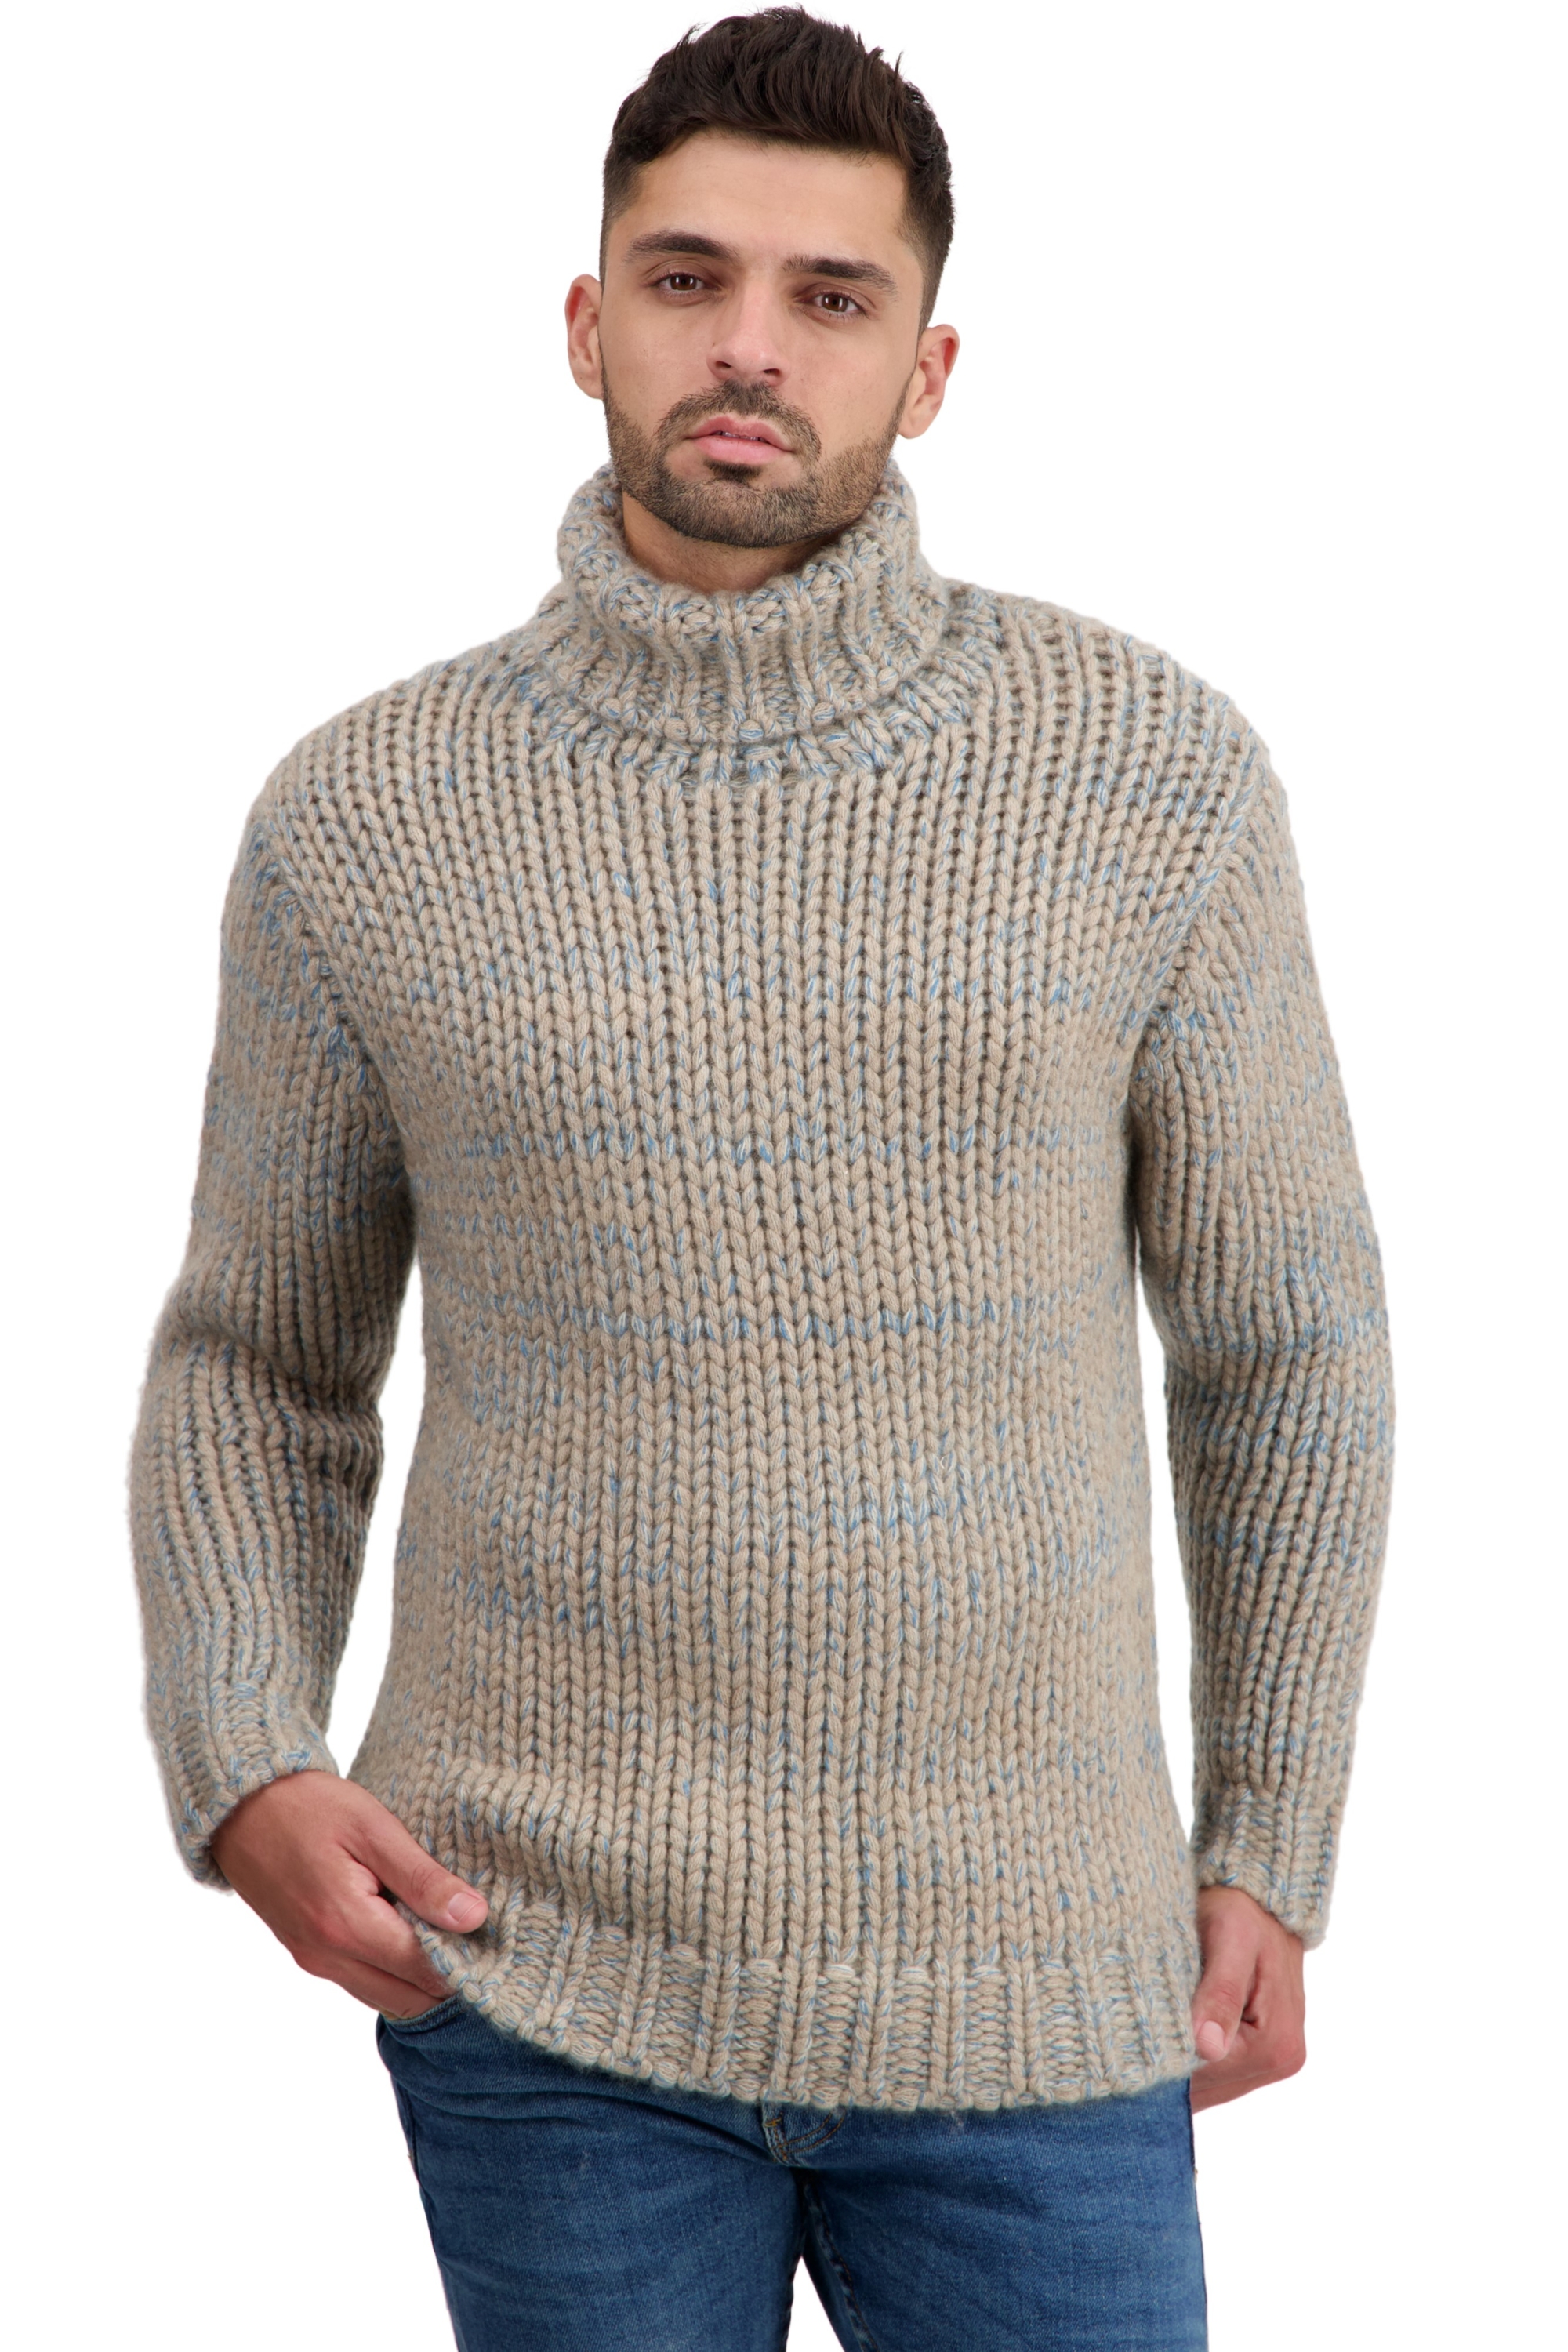 Cachemire pull homme col roule togo natural brown manor blue natural beige 2xl